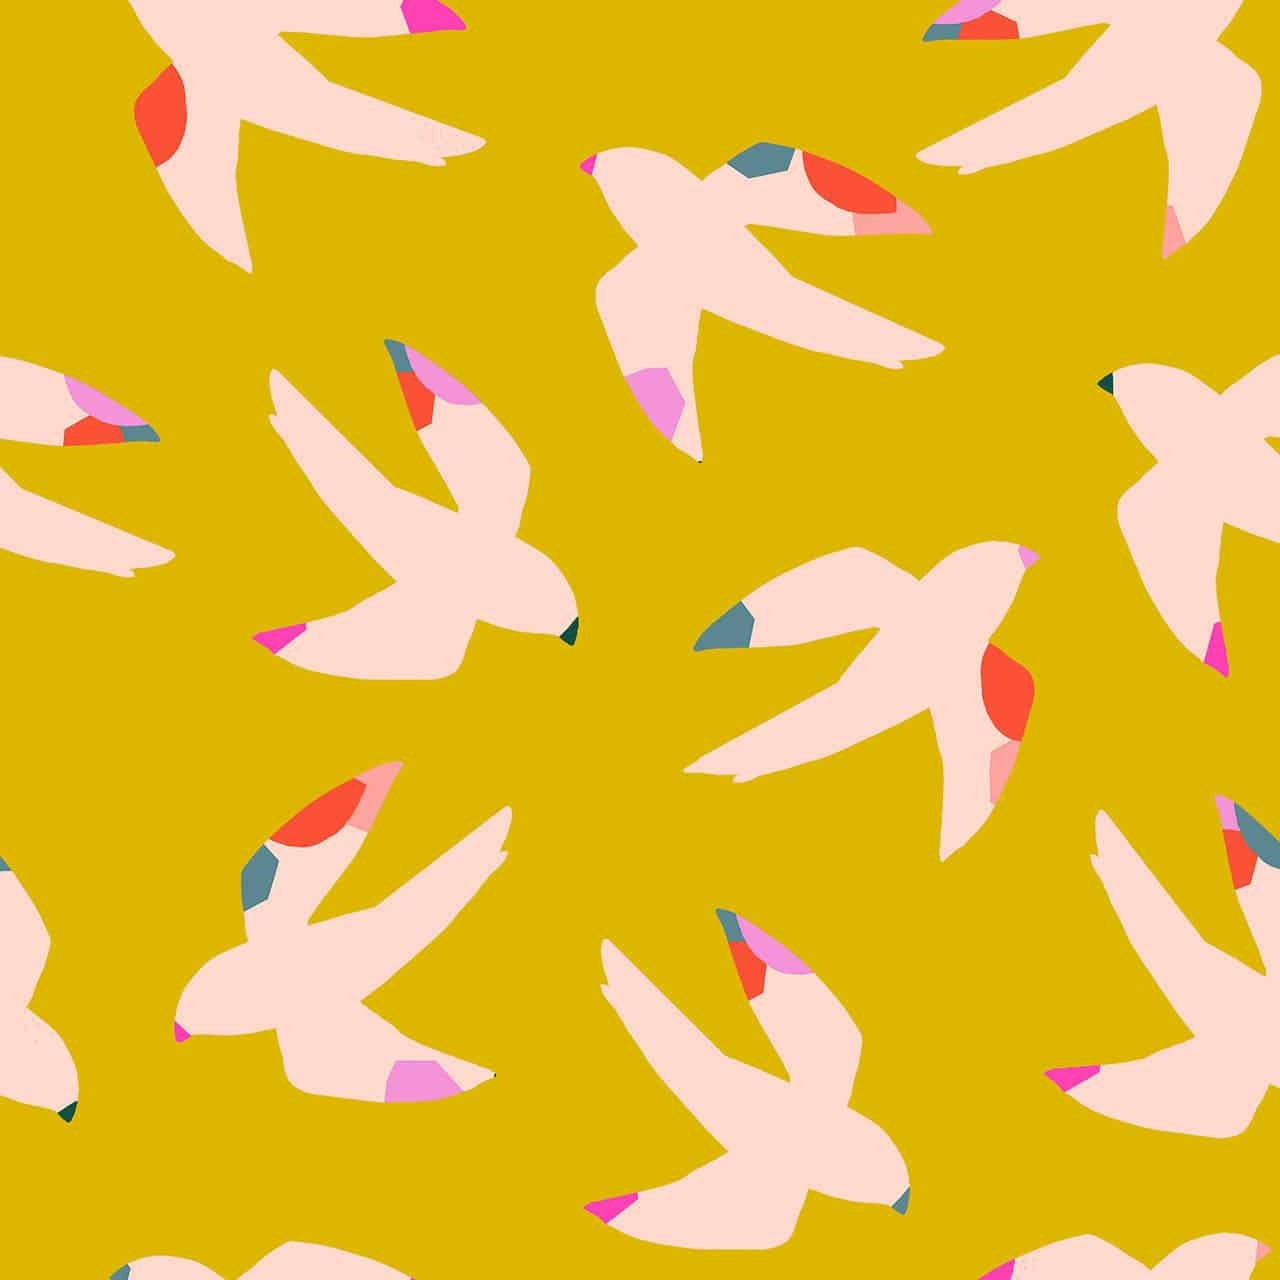 Pale pink flying bird silhouette on mustard yellow rayon fabric